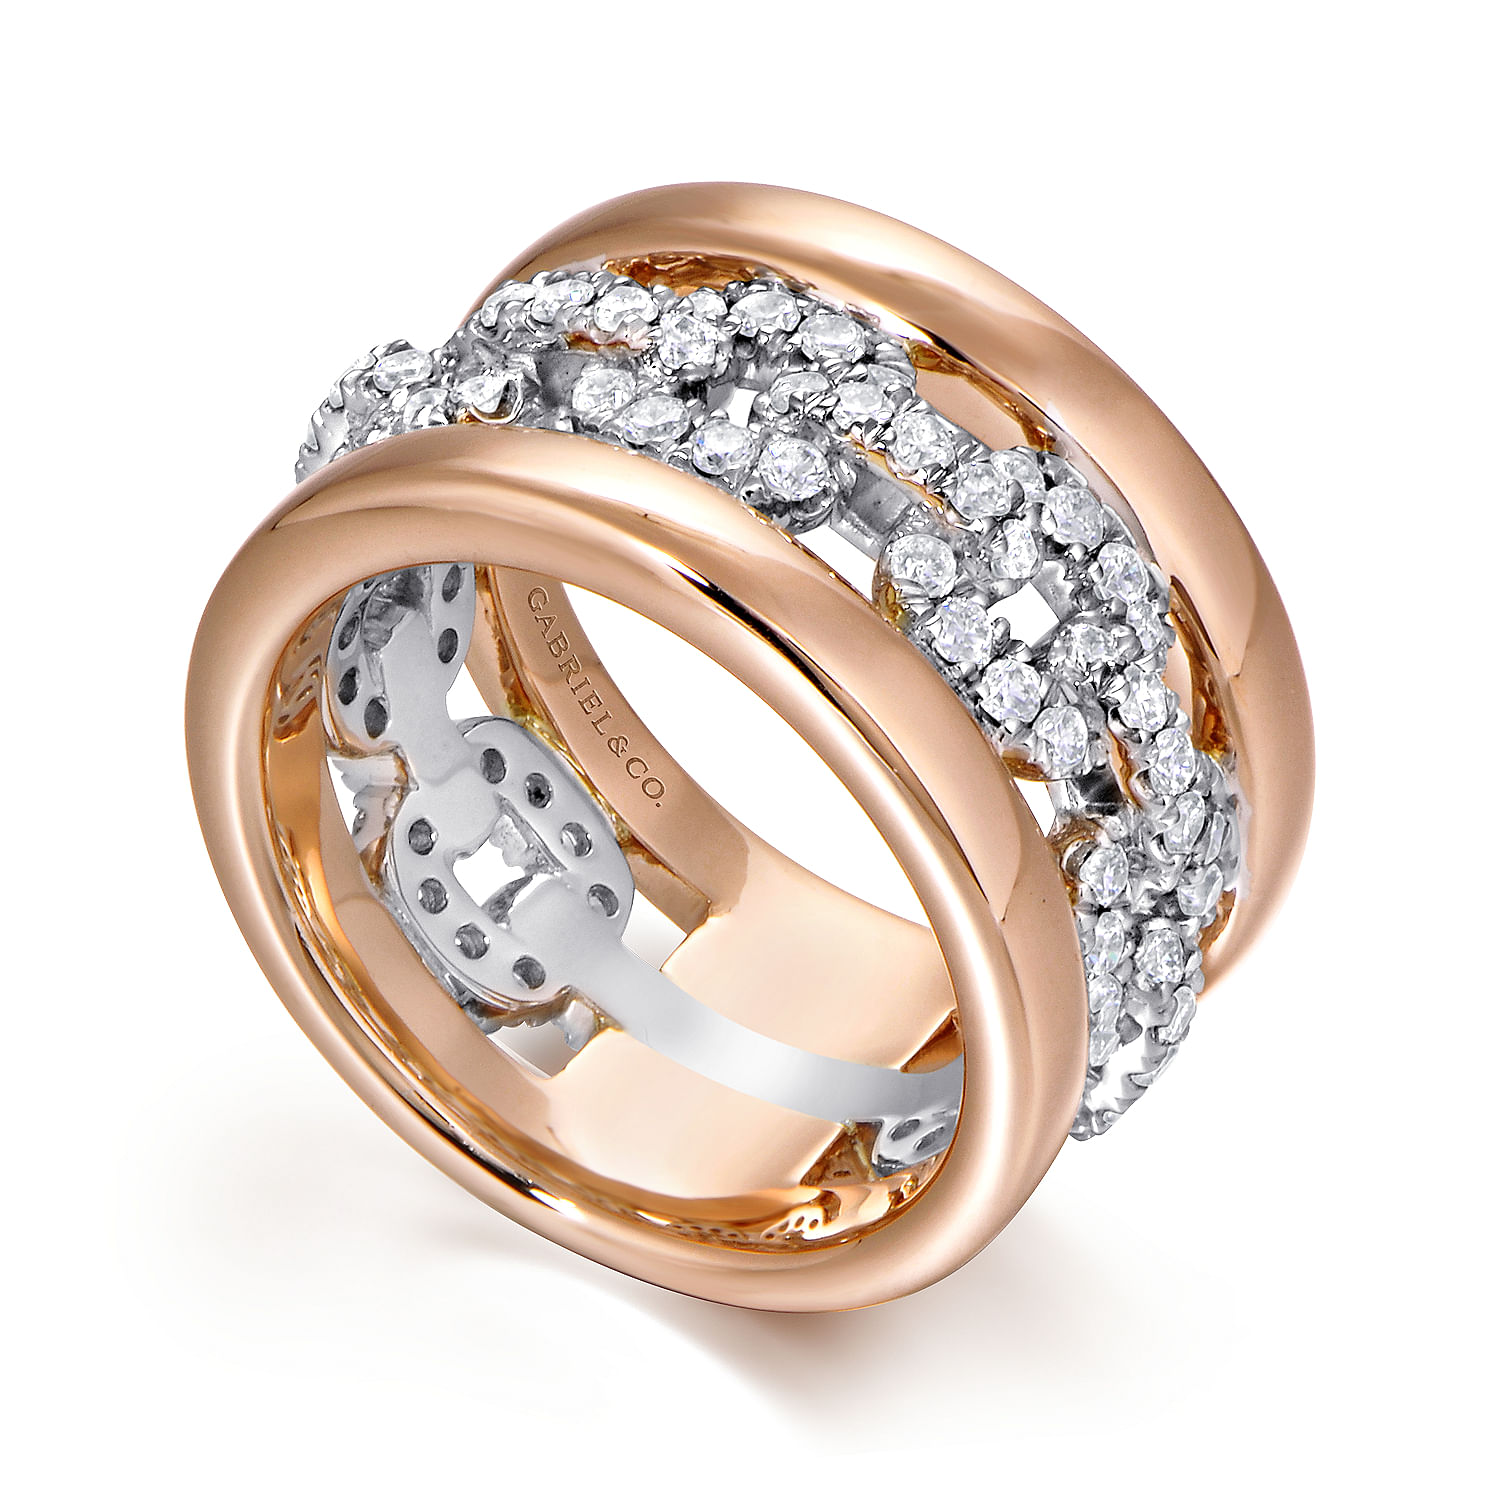 Wide 14K White and Rose Gold Fancy Diamond Anniversary Band